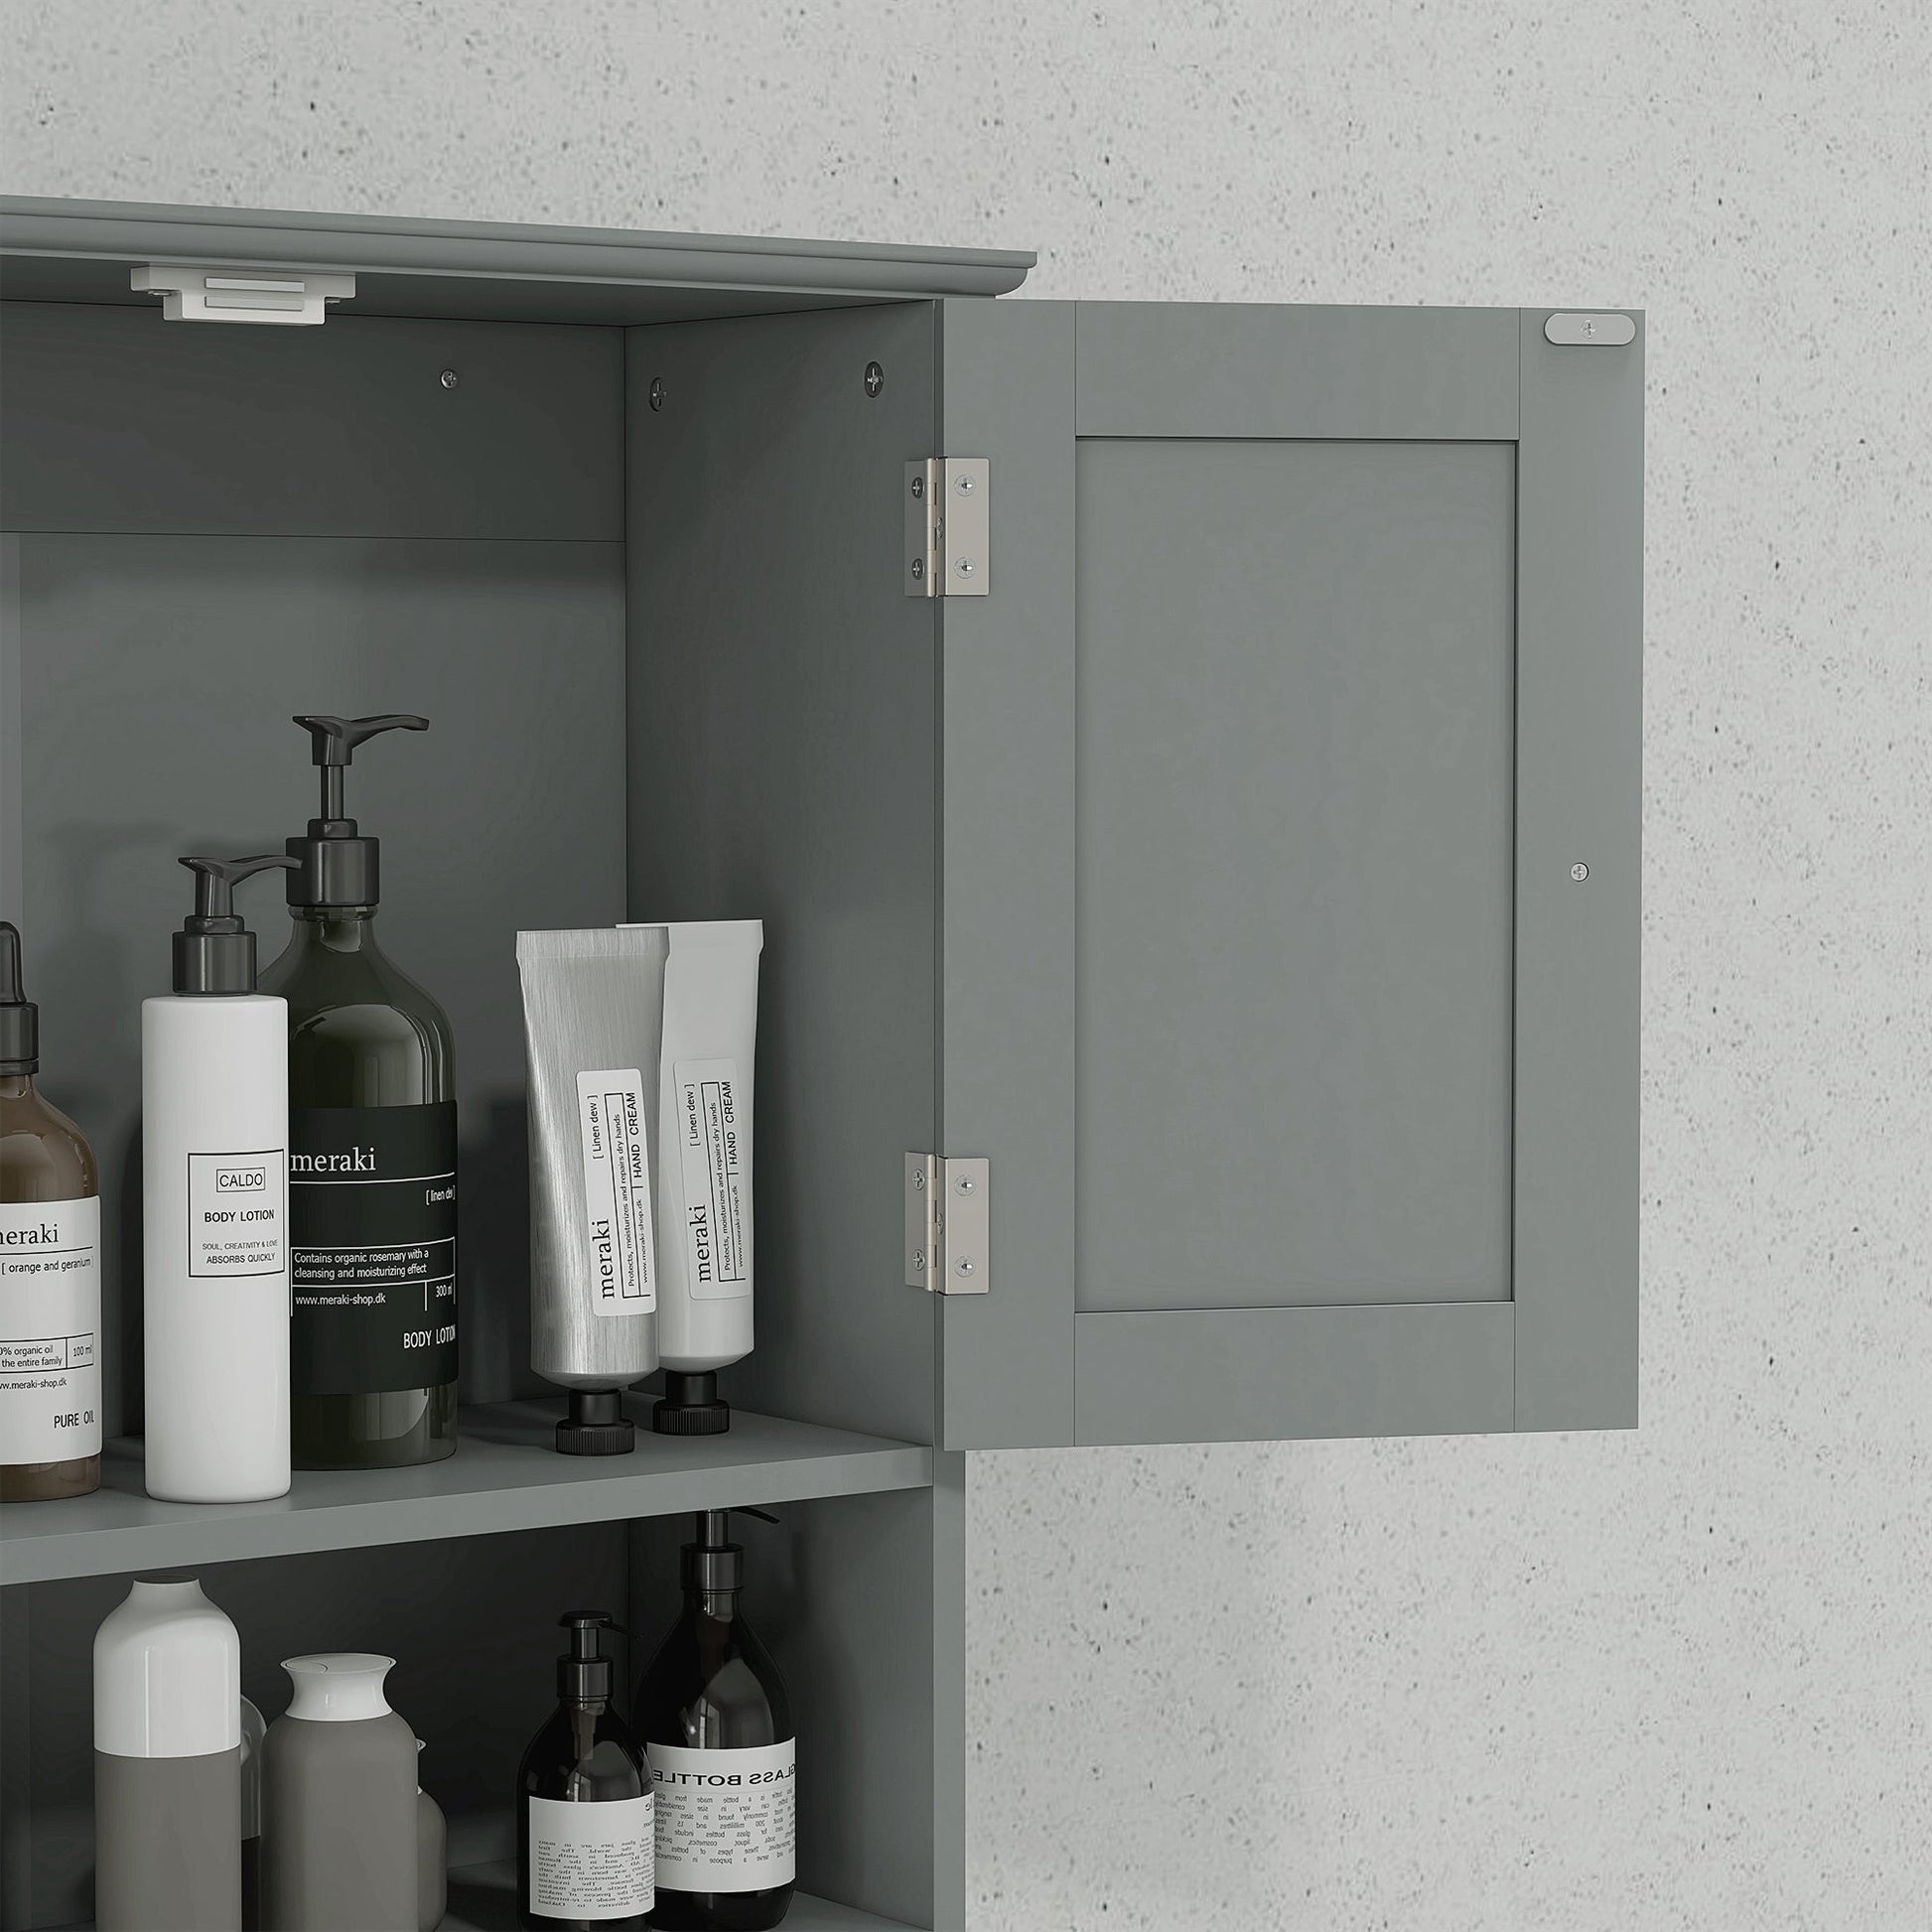 Bathroom Wall Cabinet, Medicine Cabinet, Over Toilet Storage Cabinet with Shelf and Drawers for Hallway, Living Room, Grey at Gallery Canada